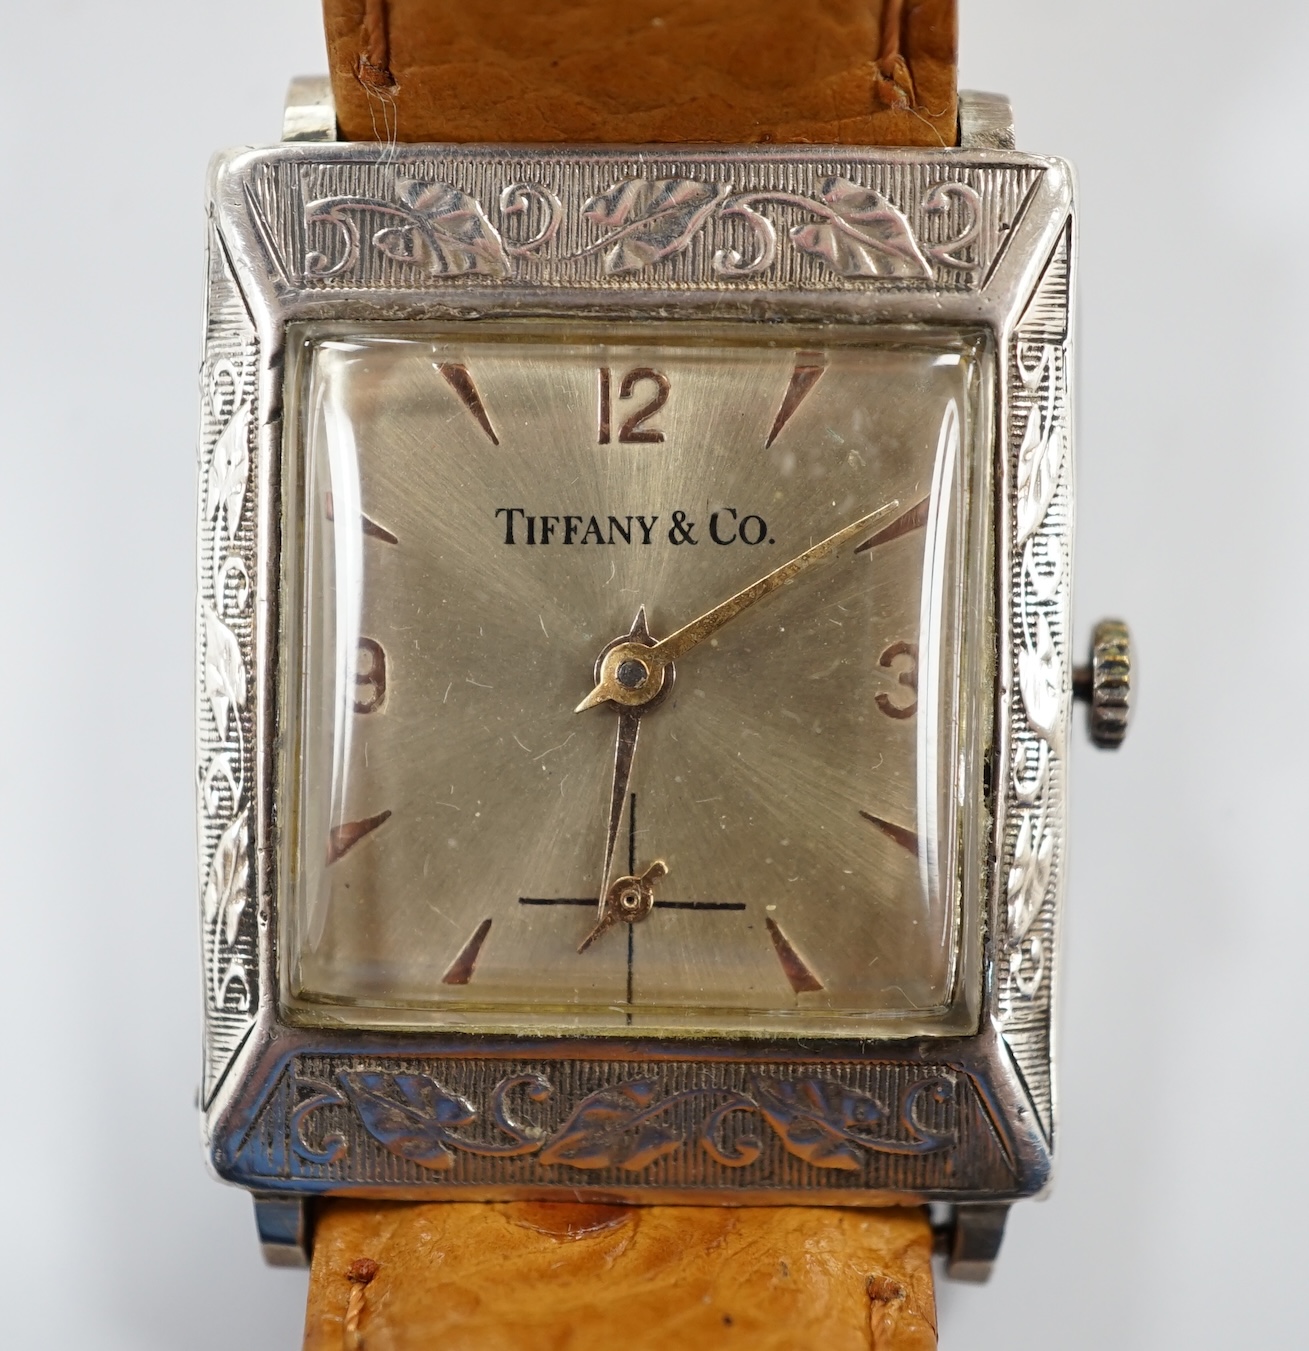 A German sterling manual wind dress wrist watch, retailed by Tiffany & Co, with baton and quarterly Arabic numerals, on an associated leather strap.